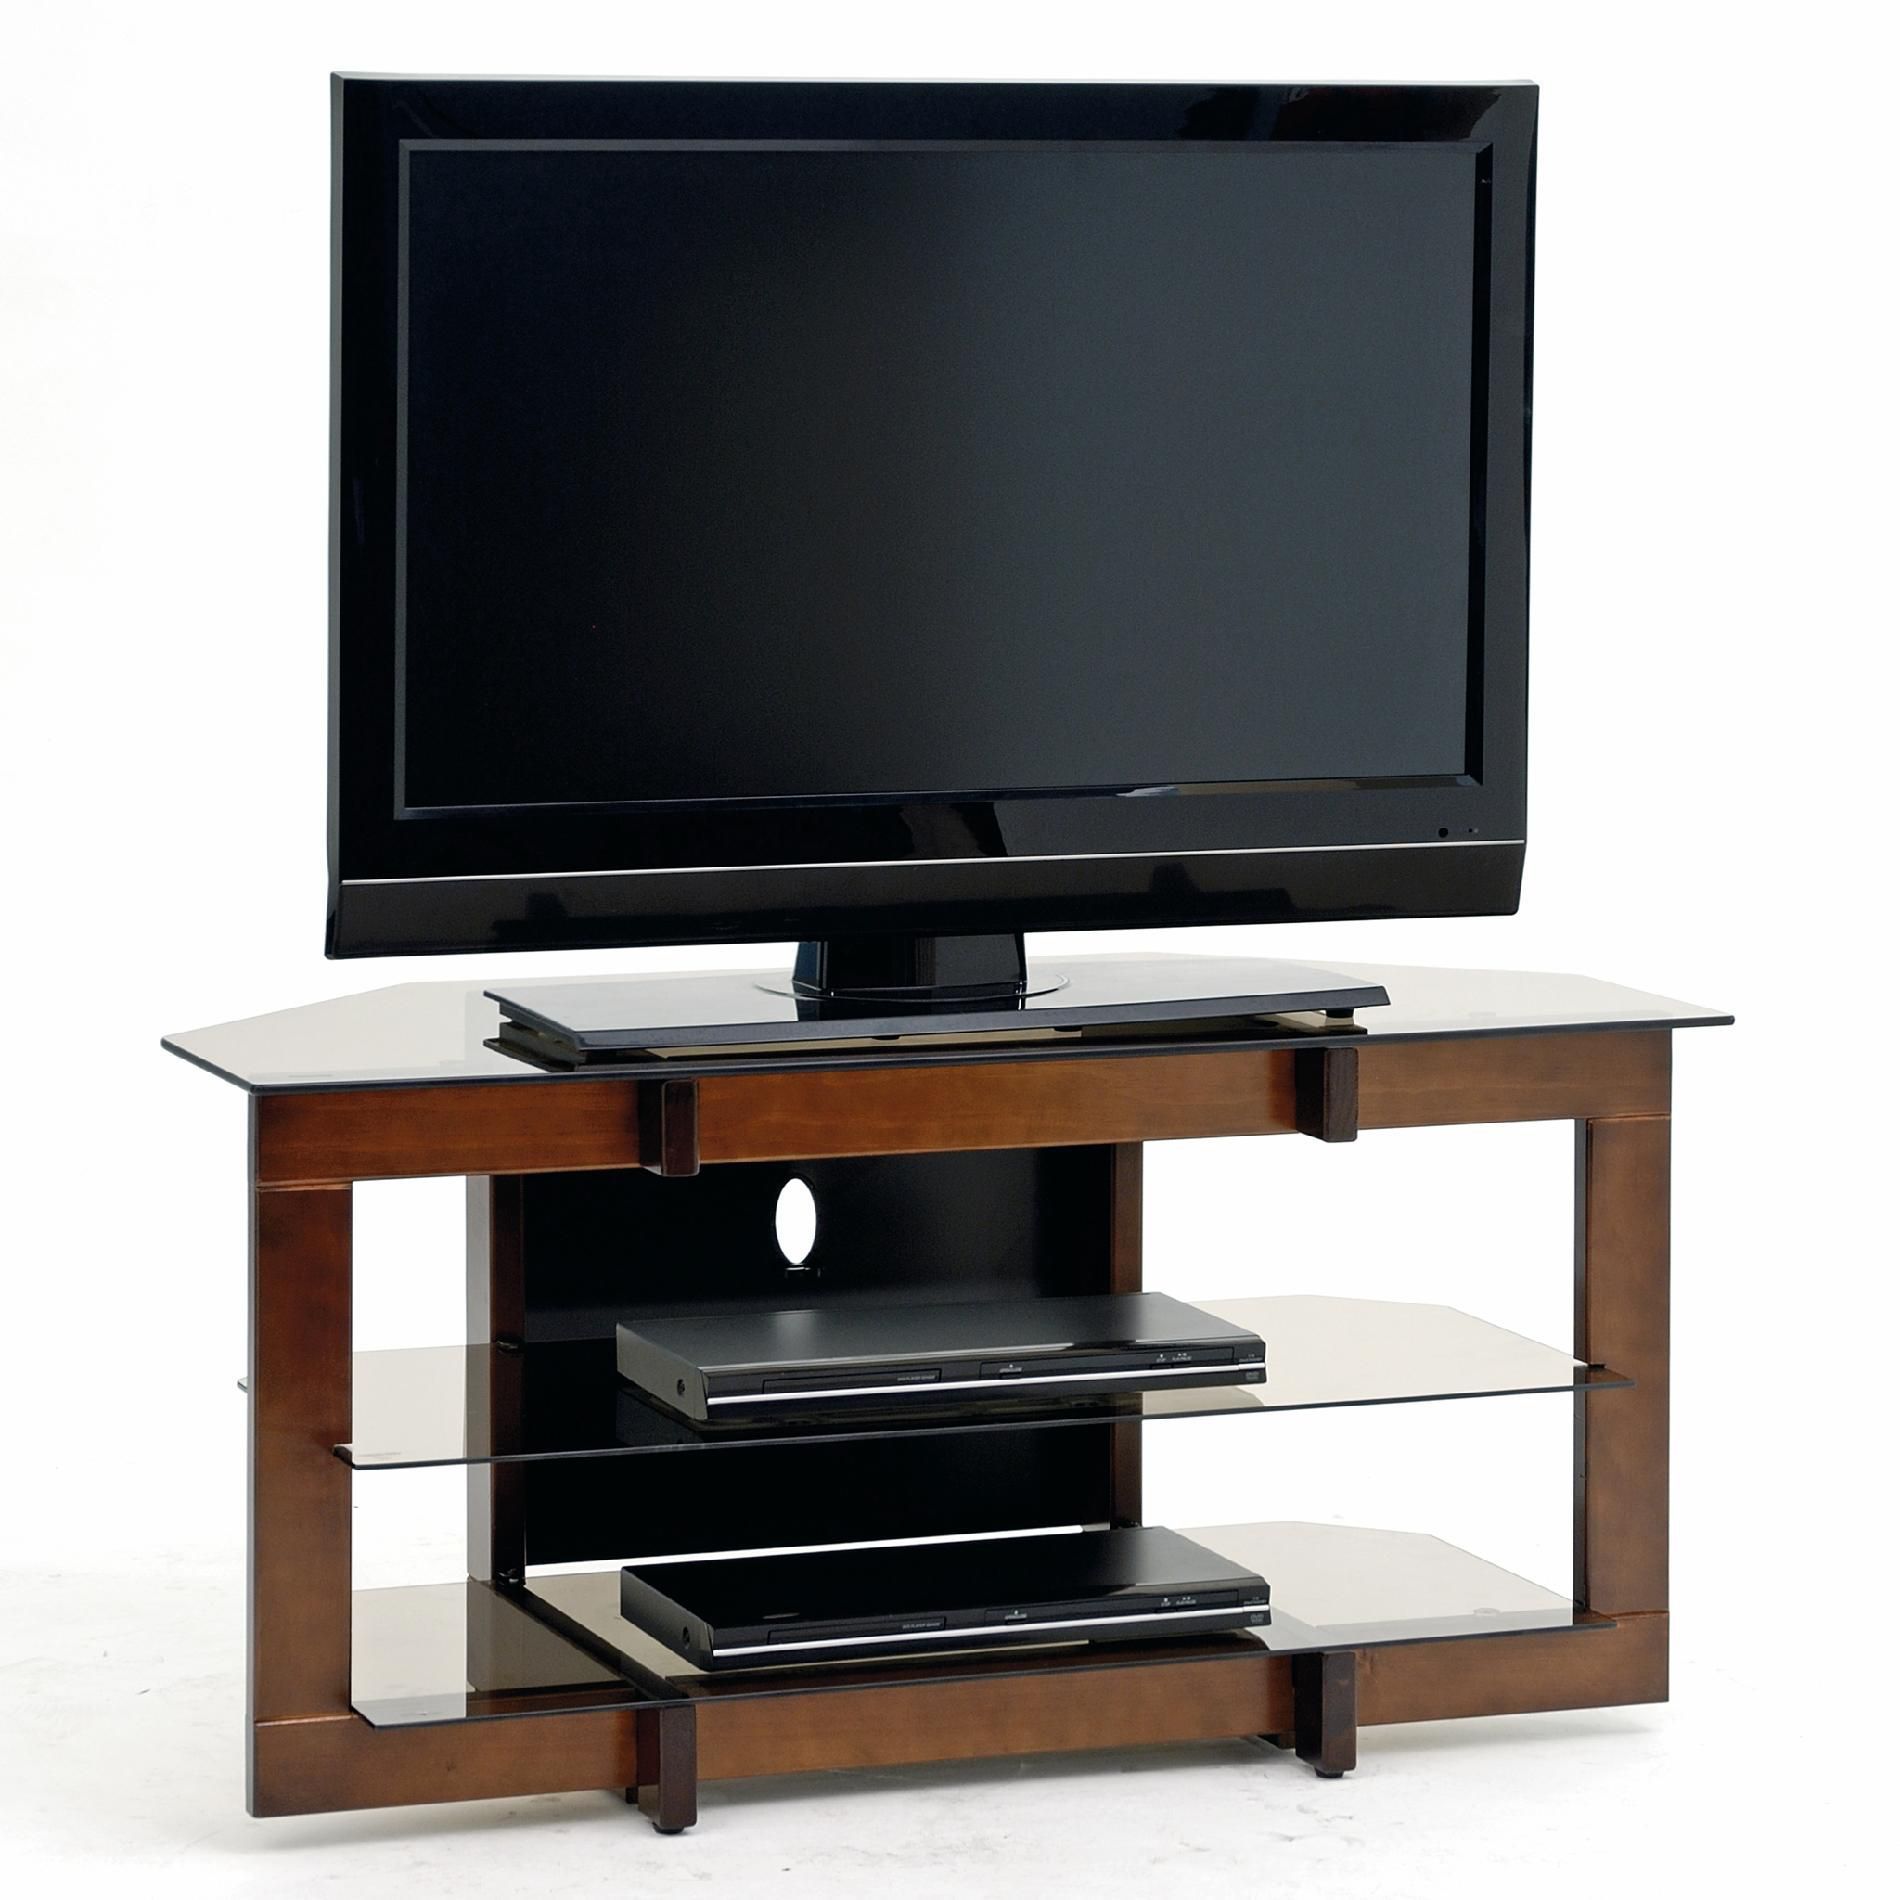 Awesome Best Oak And Glass Tv Stand In 2020 | Tv Ecke, Tv Pertaining To Small Corner Tv Cabinets (Photo 1 of 15)